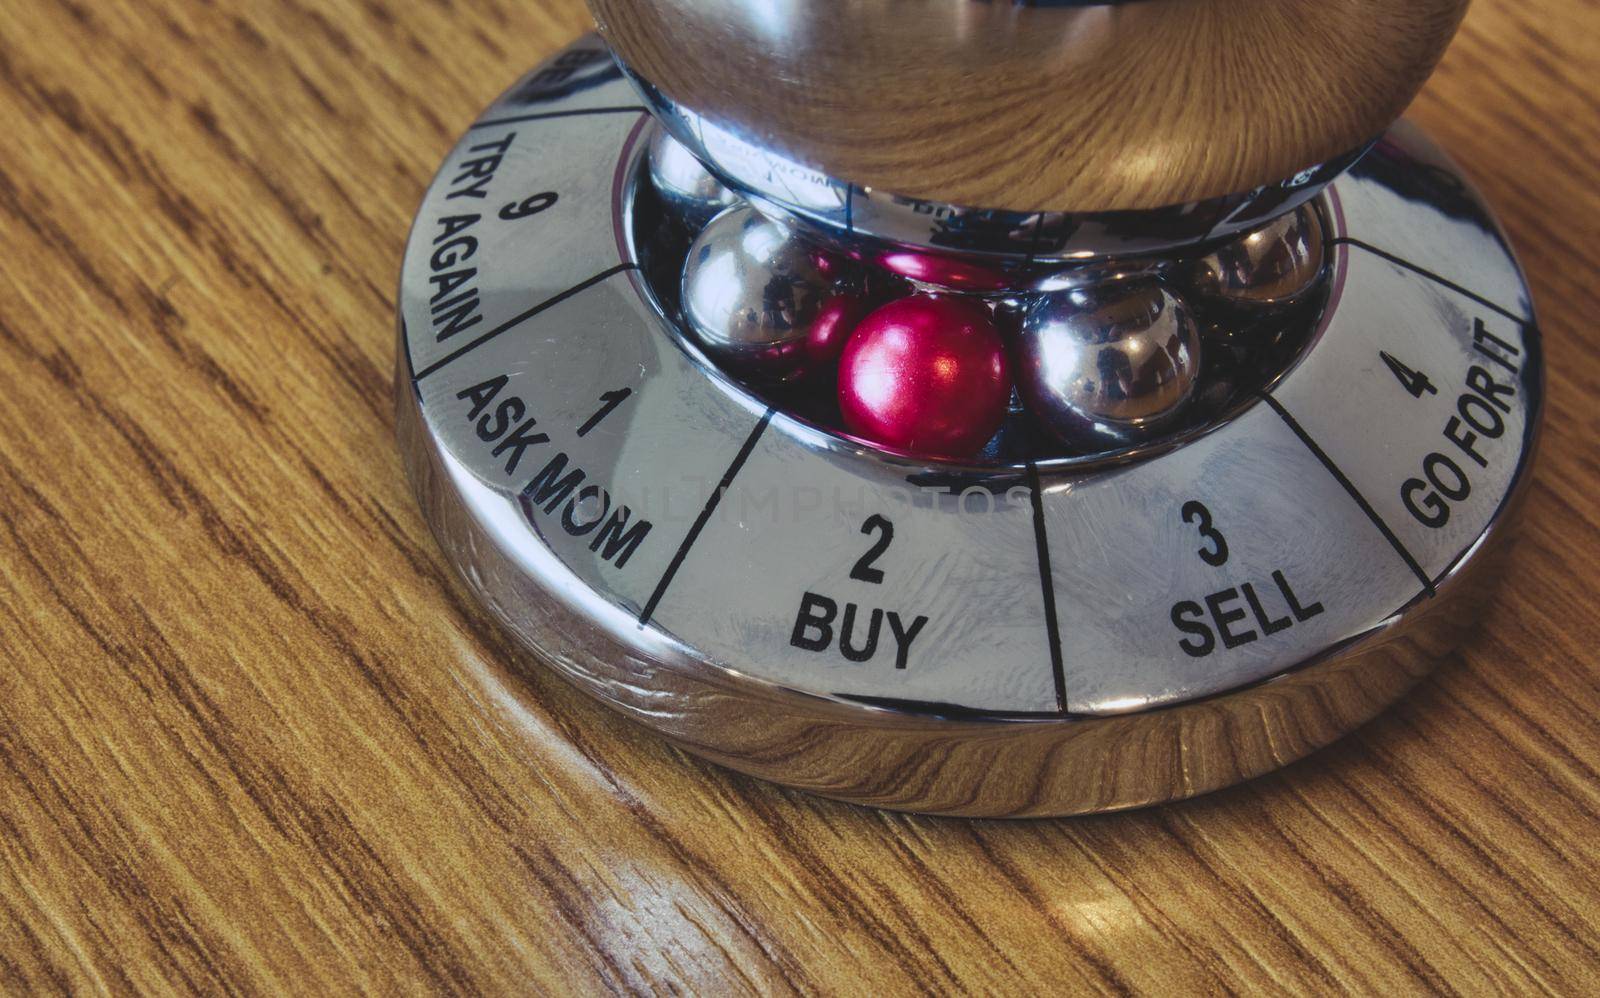 Metal decision maker with 'Buy' selected from the wheel of options